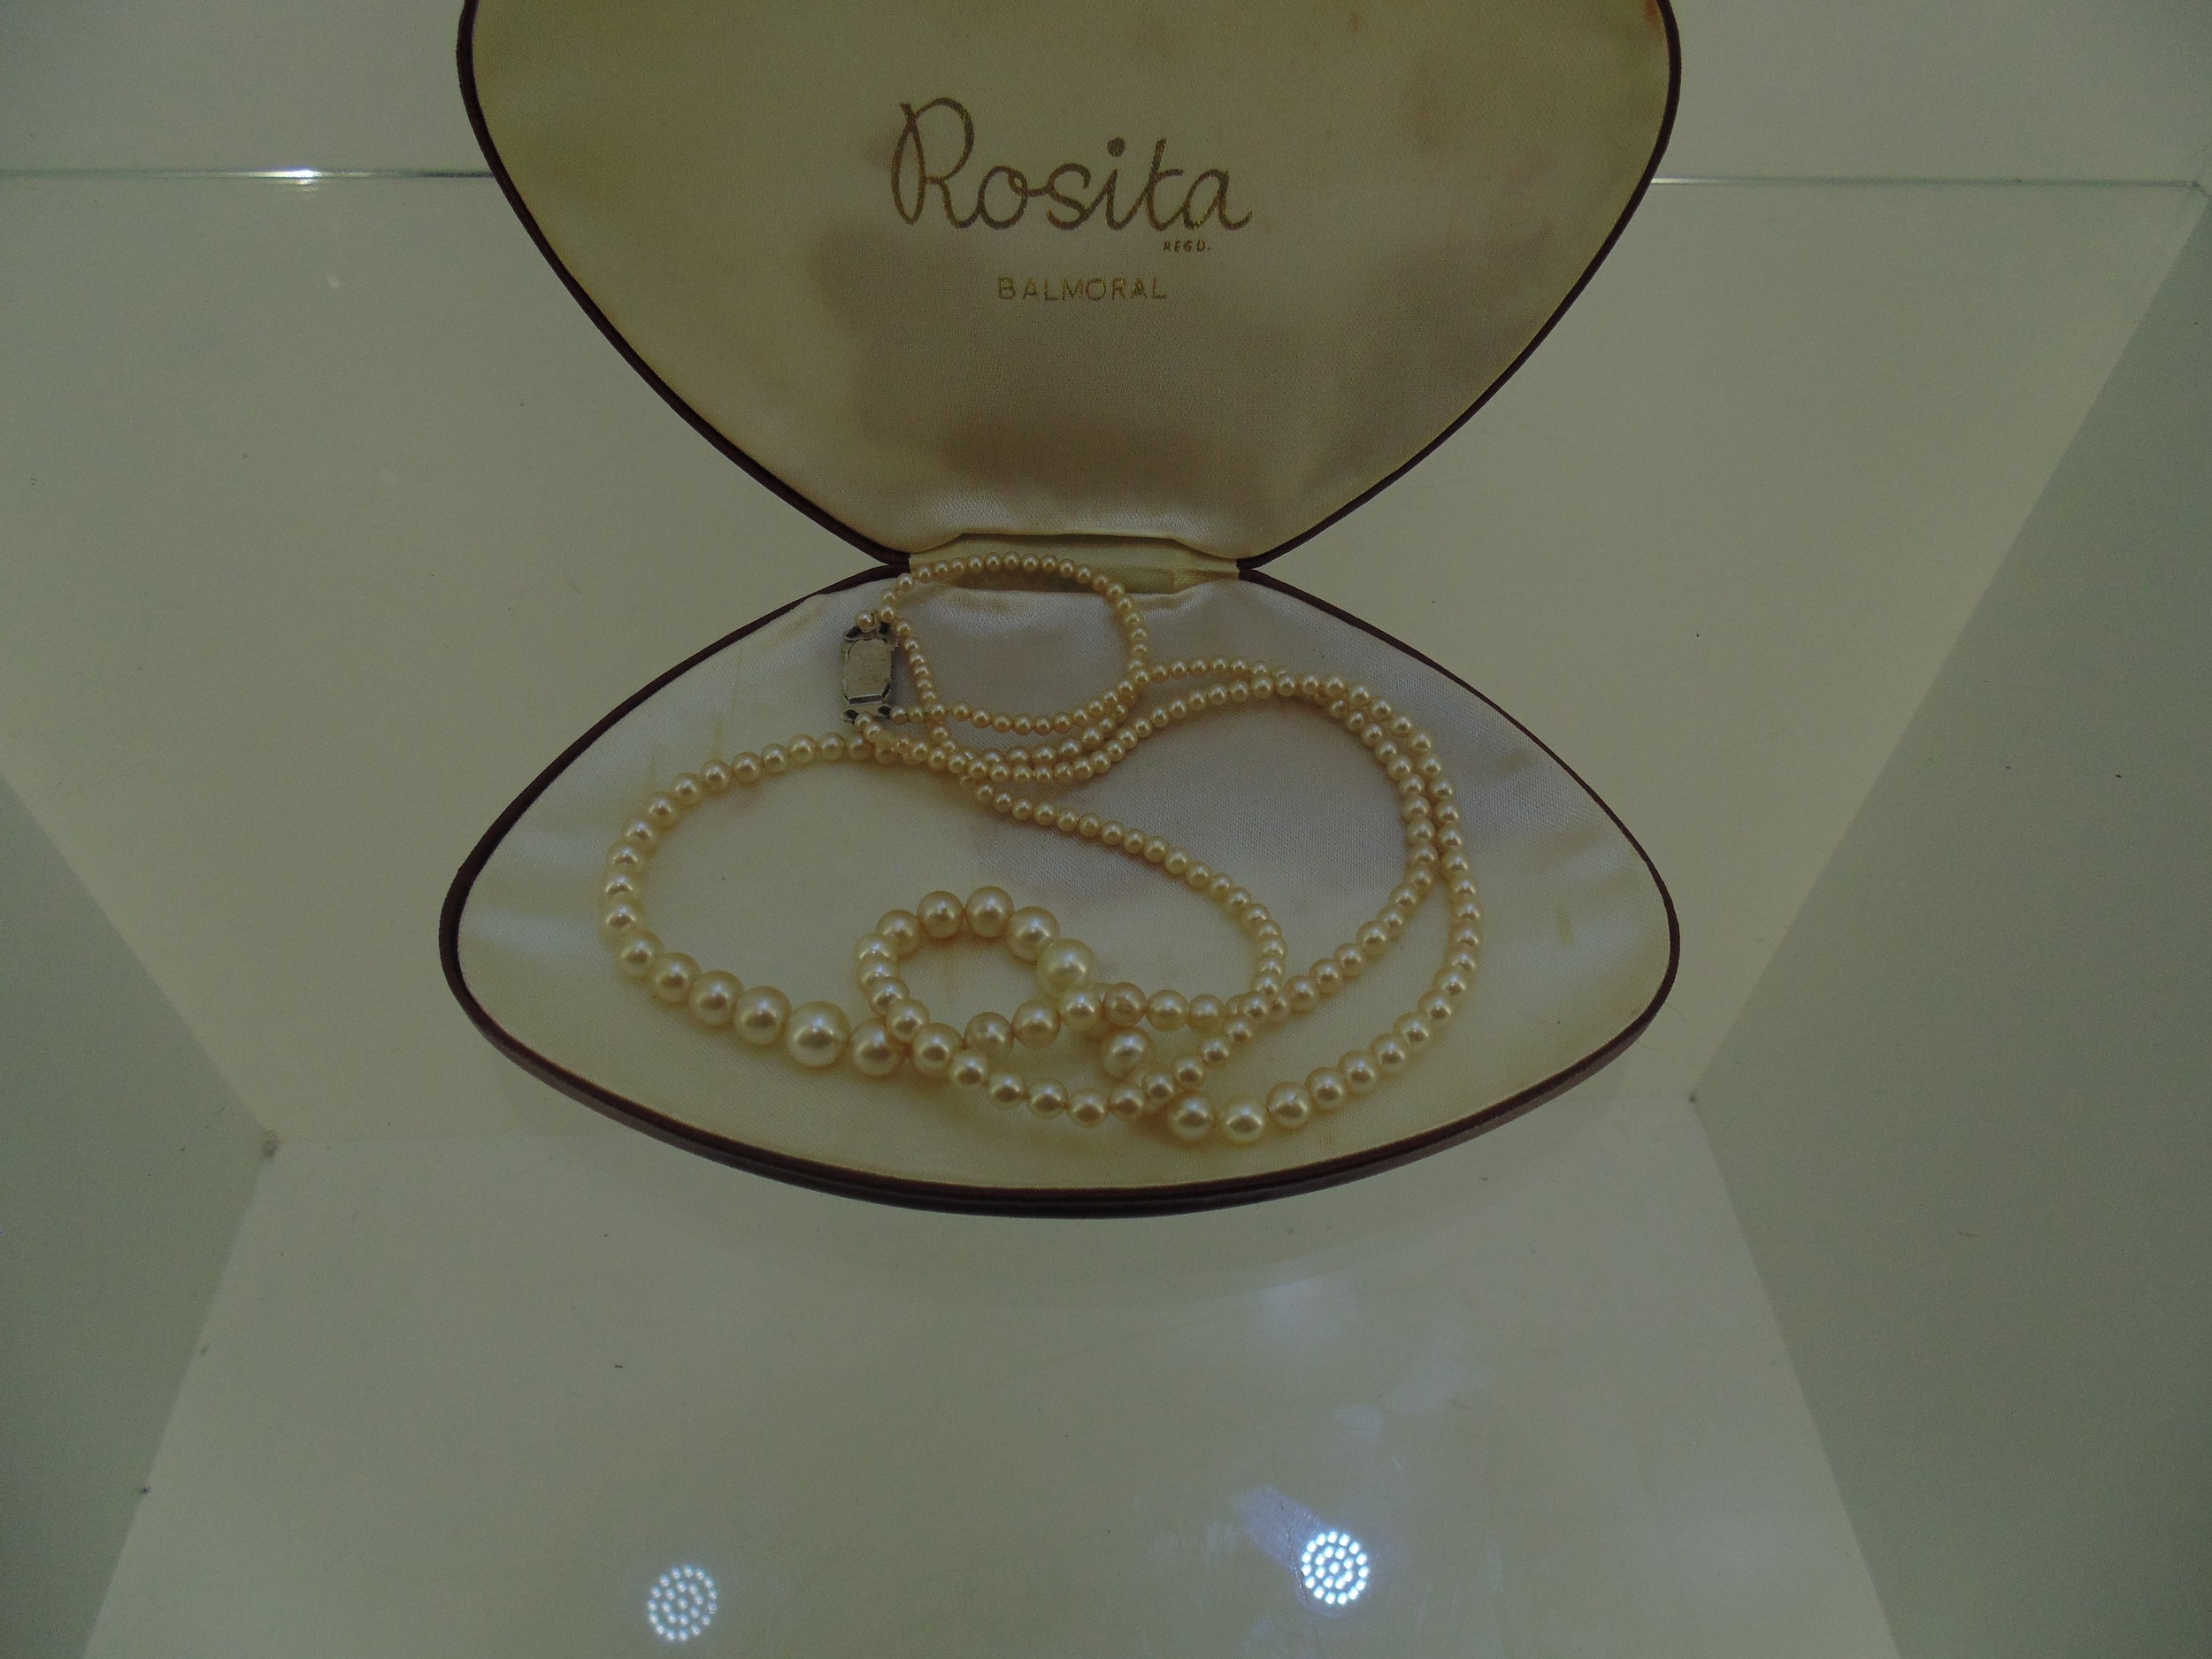 Rosita bal morrow Pearl Necklace in case